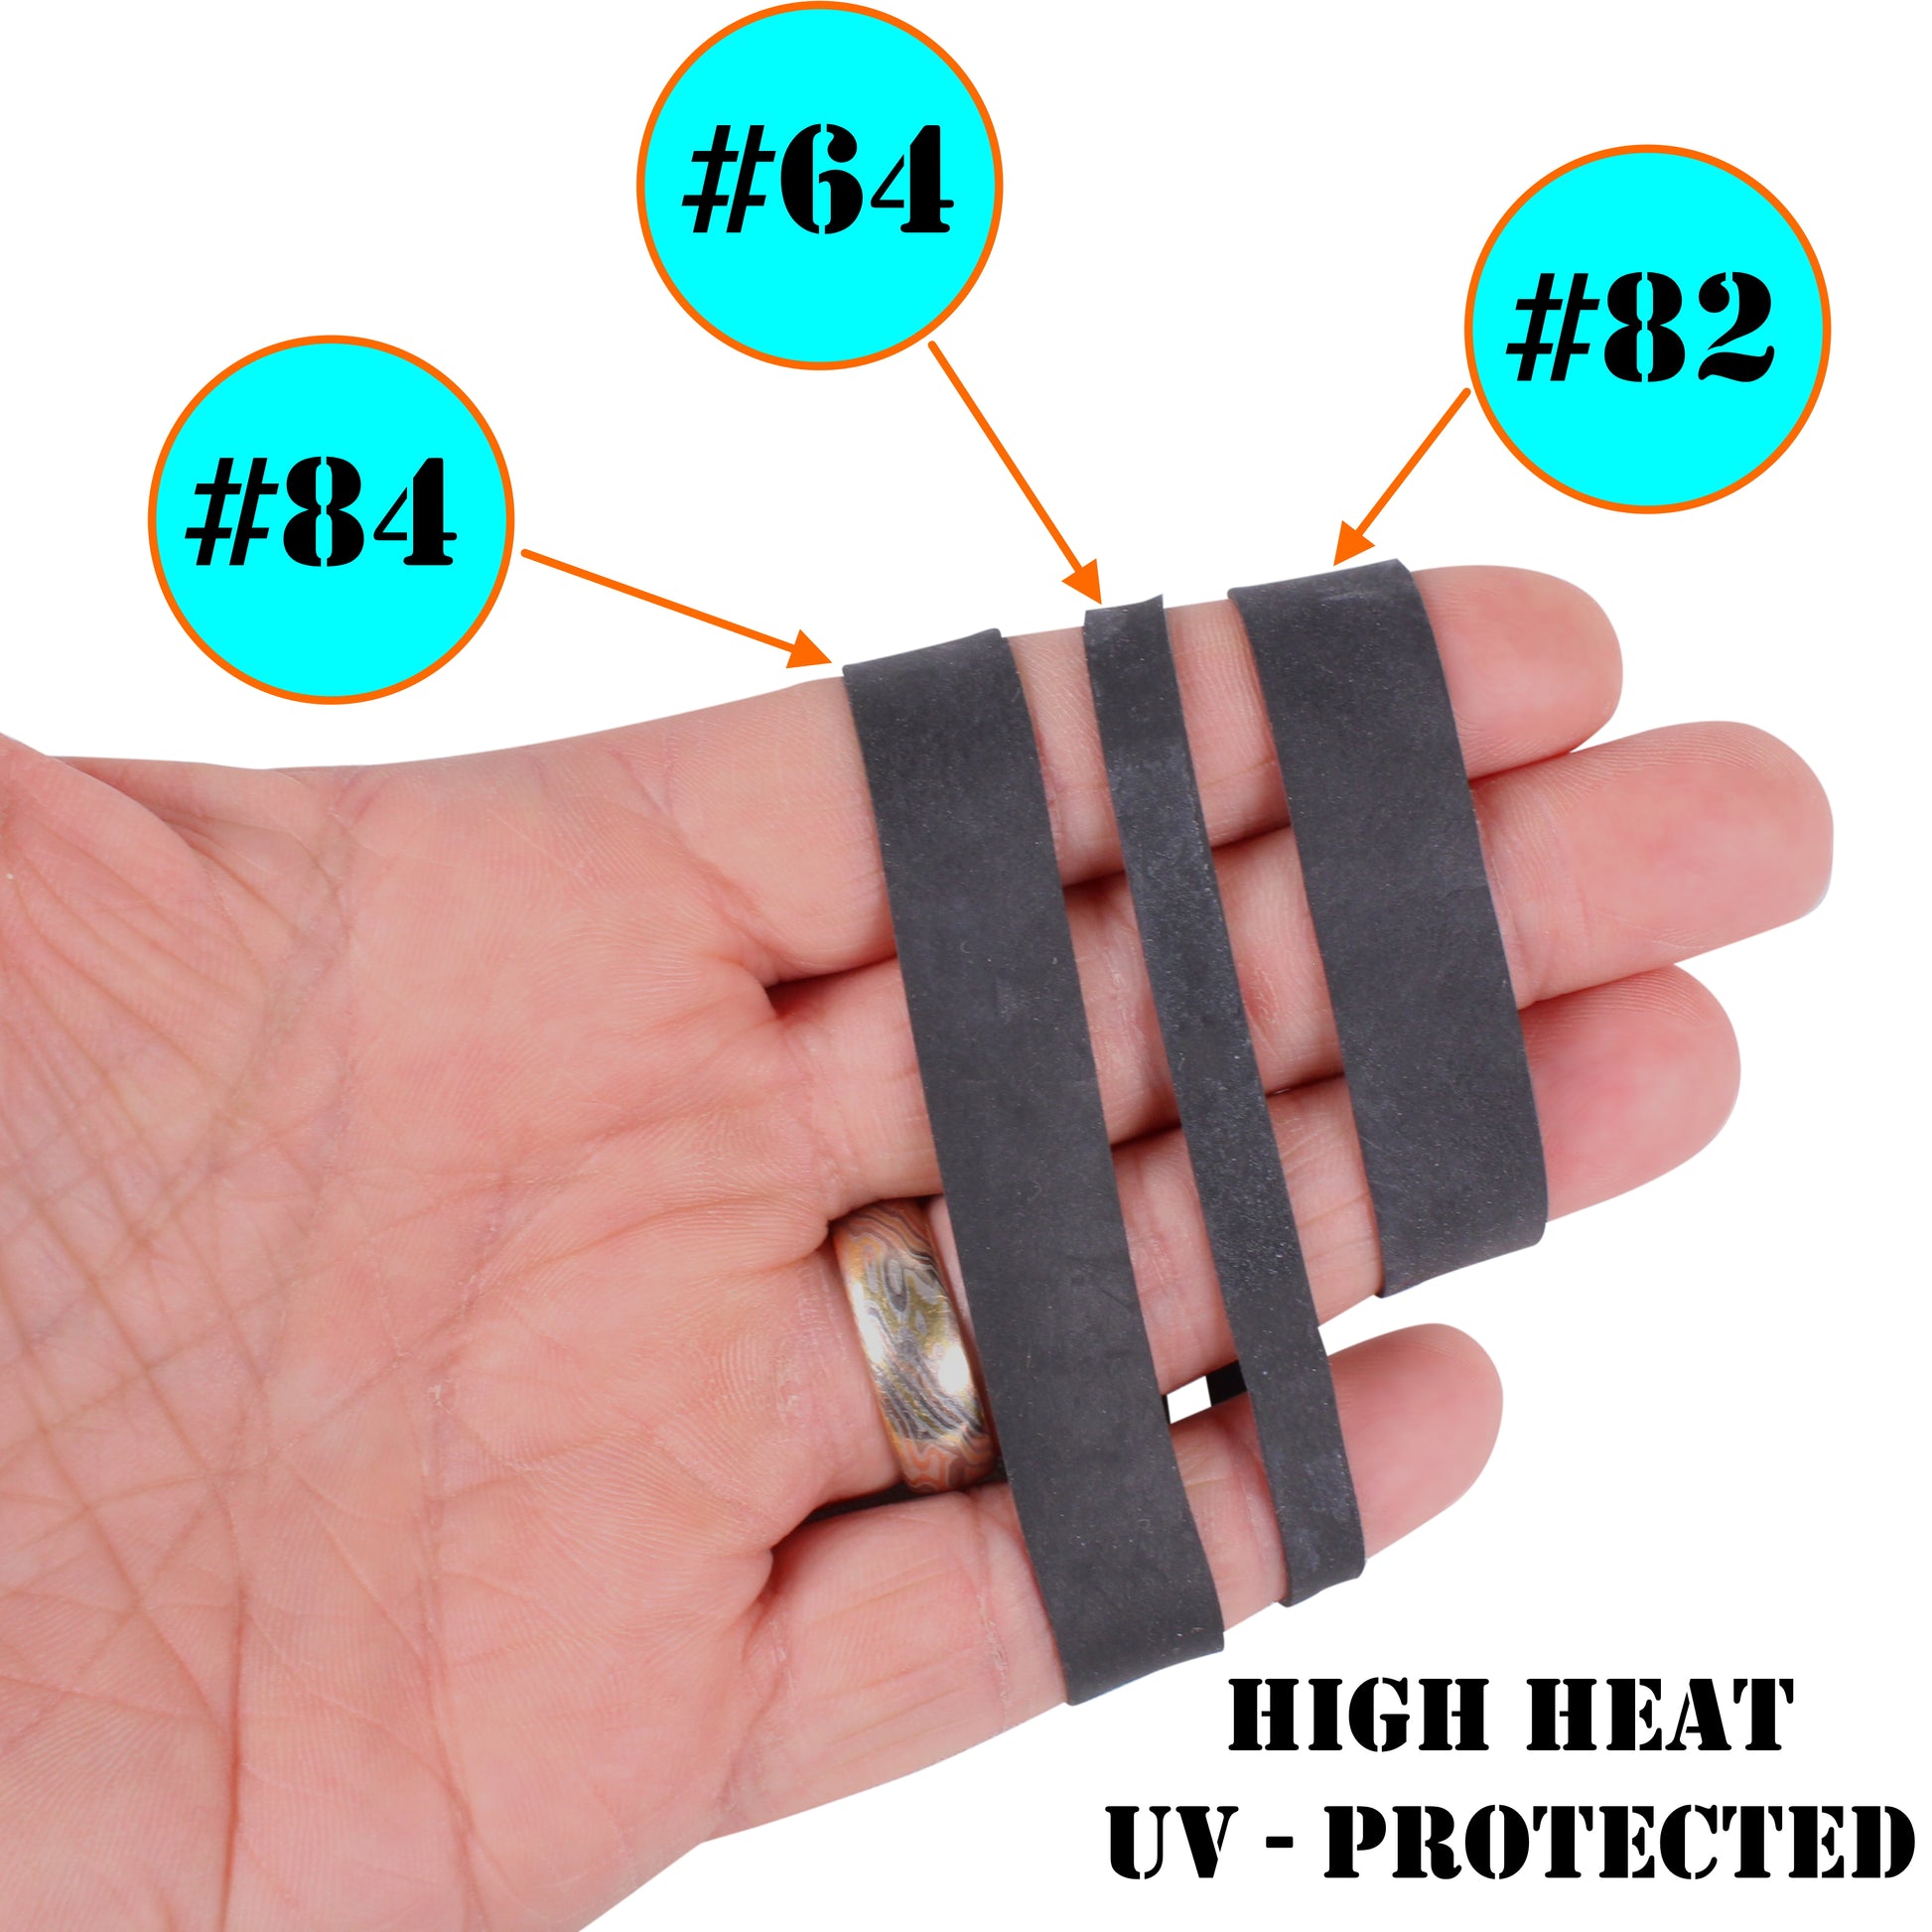  Tactical Rubber Bands Size #82 (2 1/2'' x 1/2''), 50 Pcs Black  Extra Wide Small Thick Strong Heavy Duty Rubber Bands Heat Cold UV  Resistant for Hunting Hiking Backpacking Camping